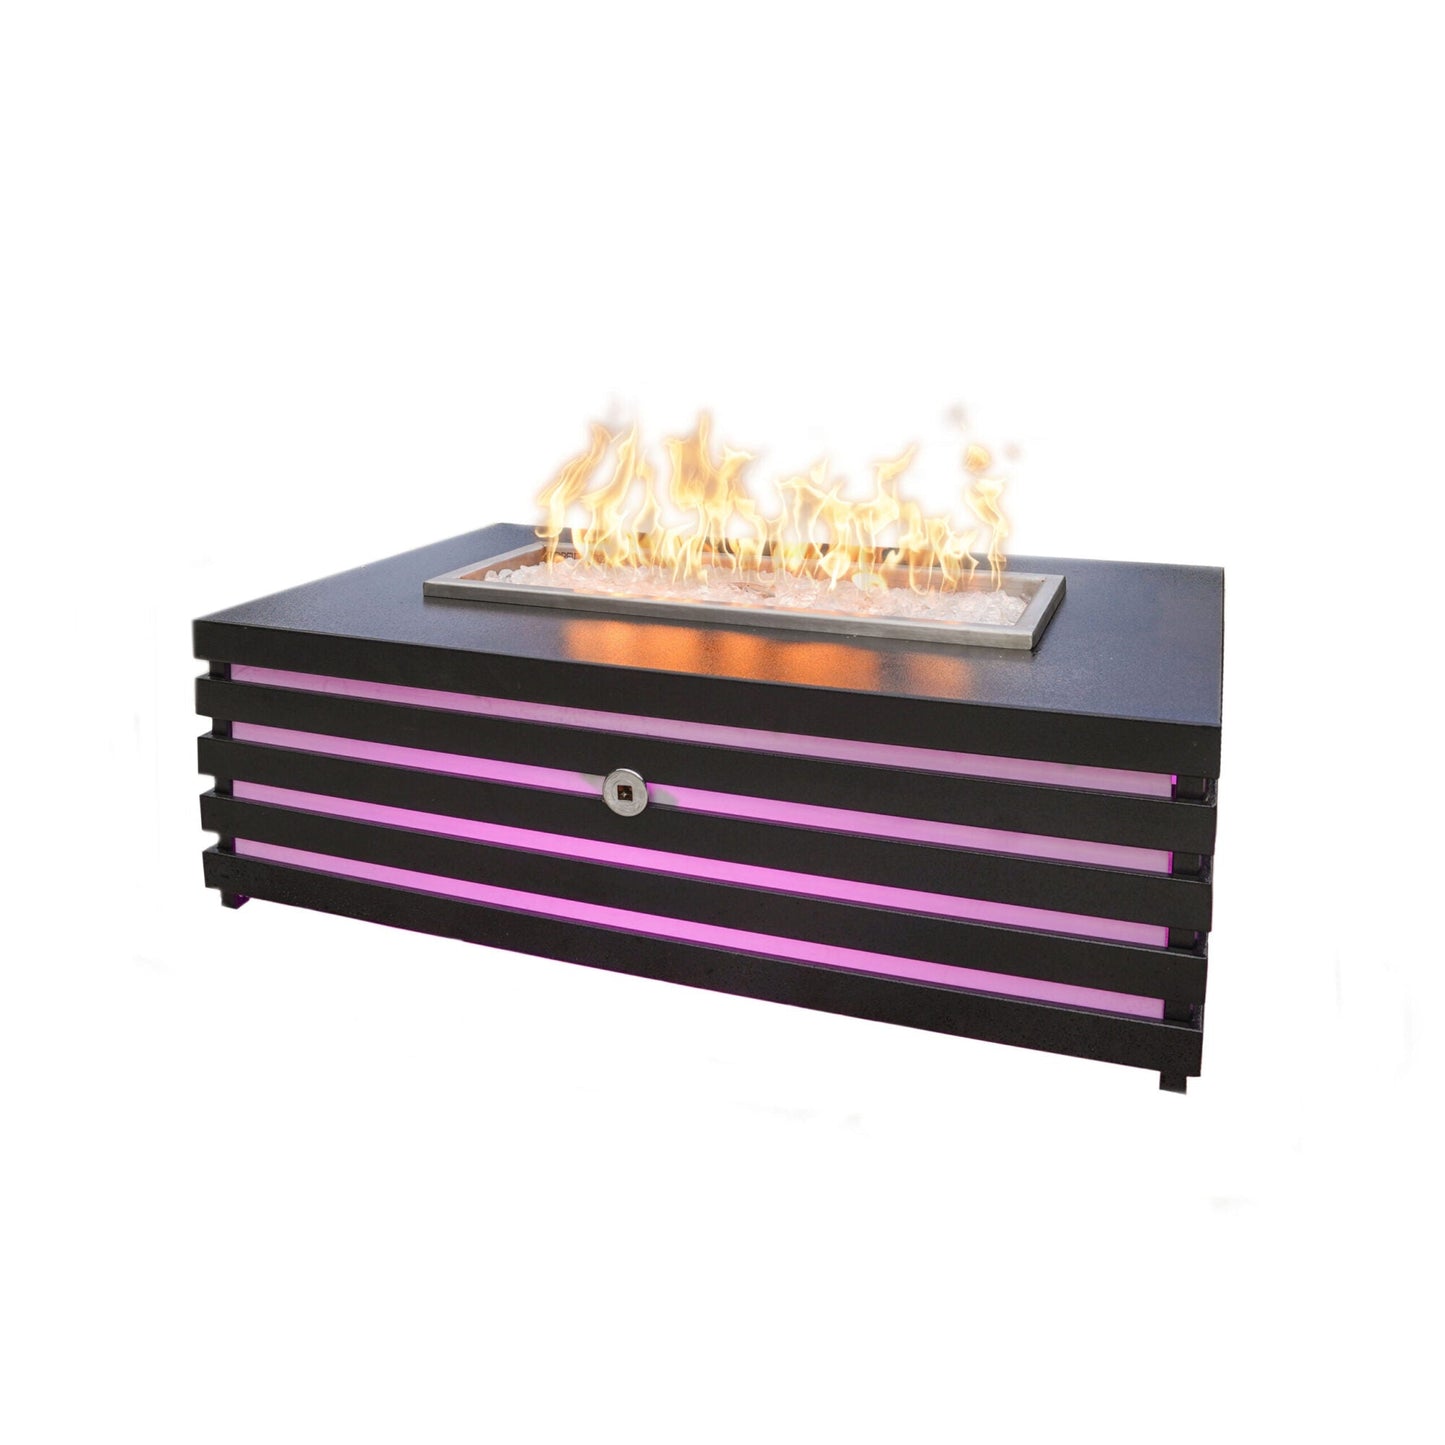 The Outdoor Plus Amina 60" Java Powder Coated Liquid Propane Fire Pit with 110V Electronic Ignition